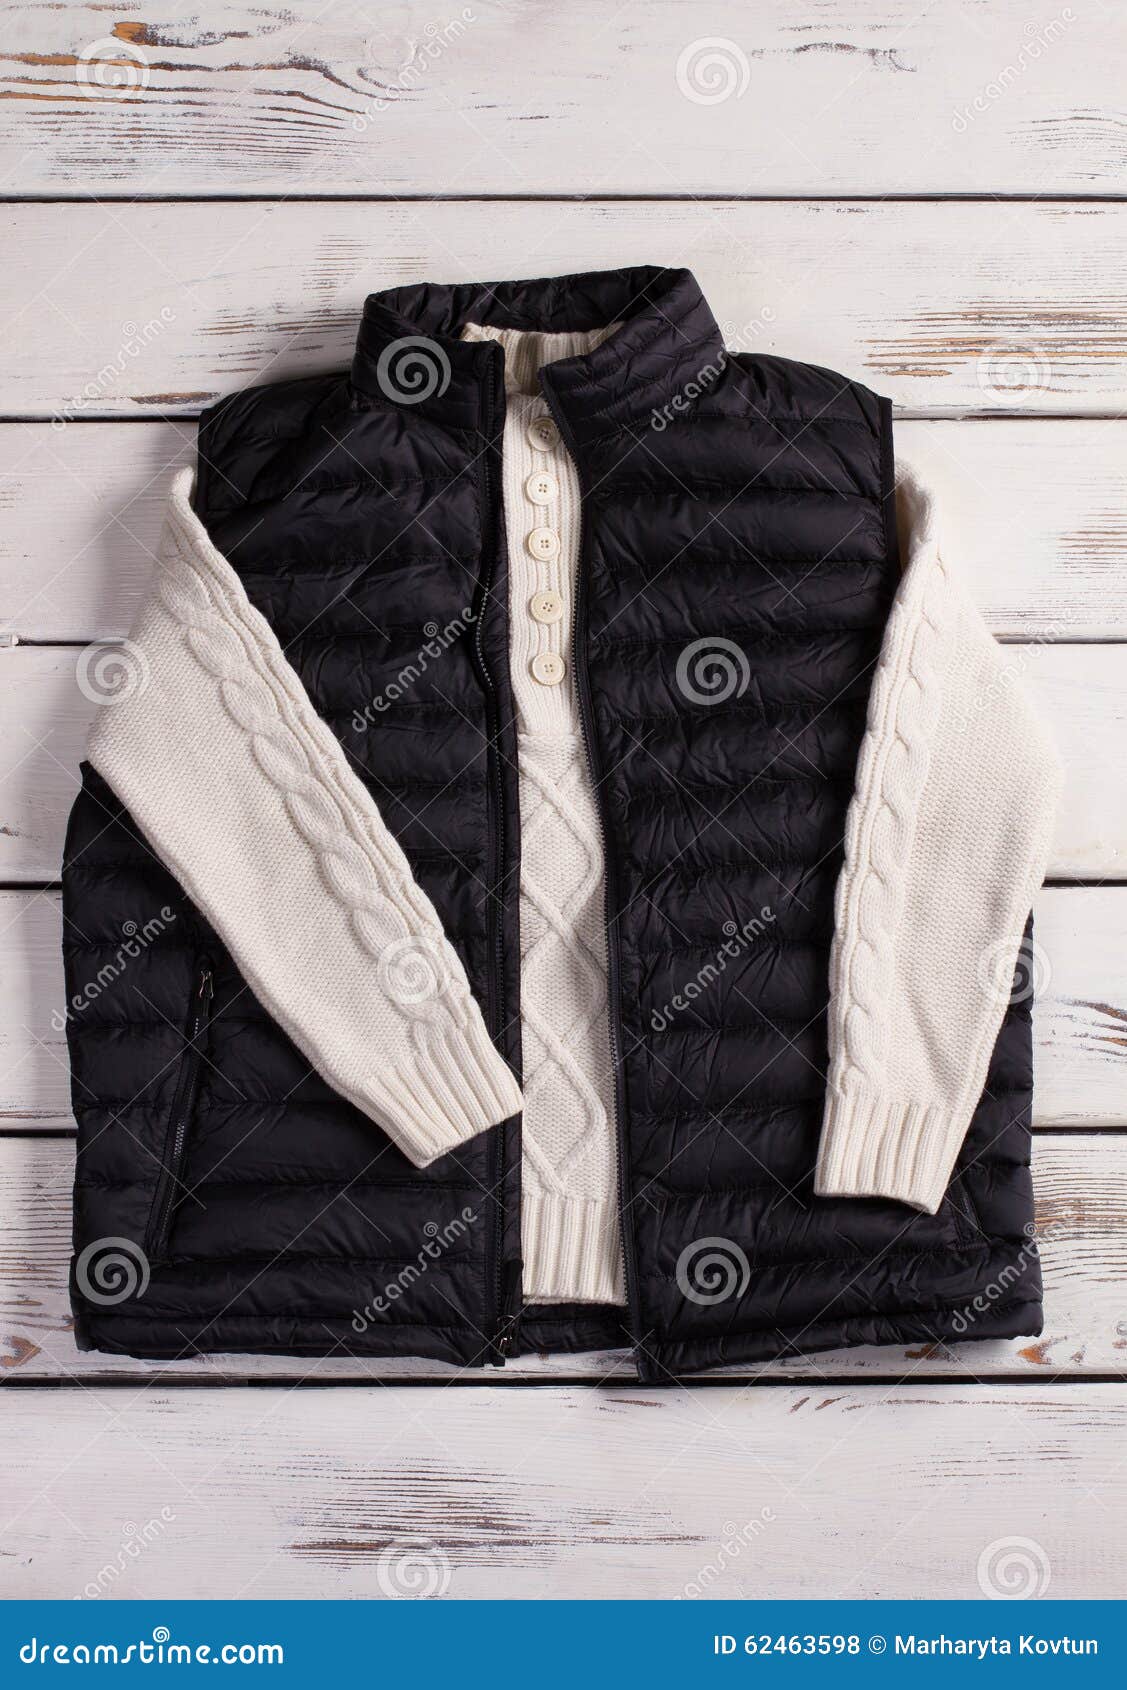 Men S Vest with a Warm Knitted Sweater. Stock Photo - Image of clothing ...